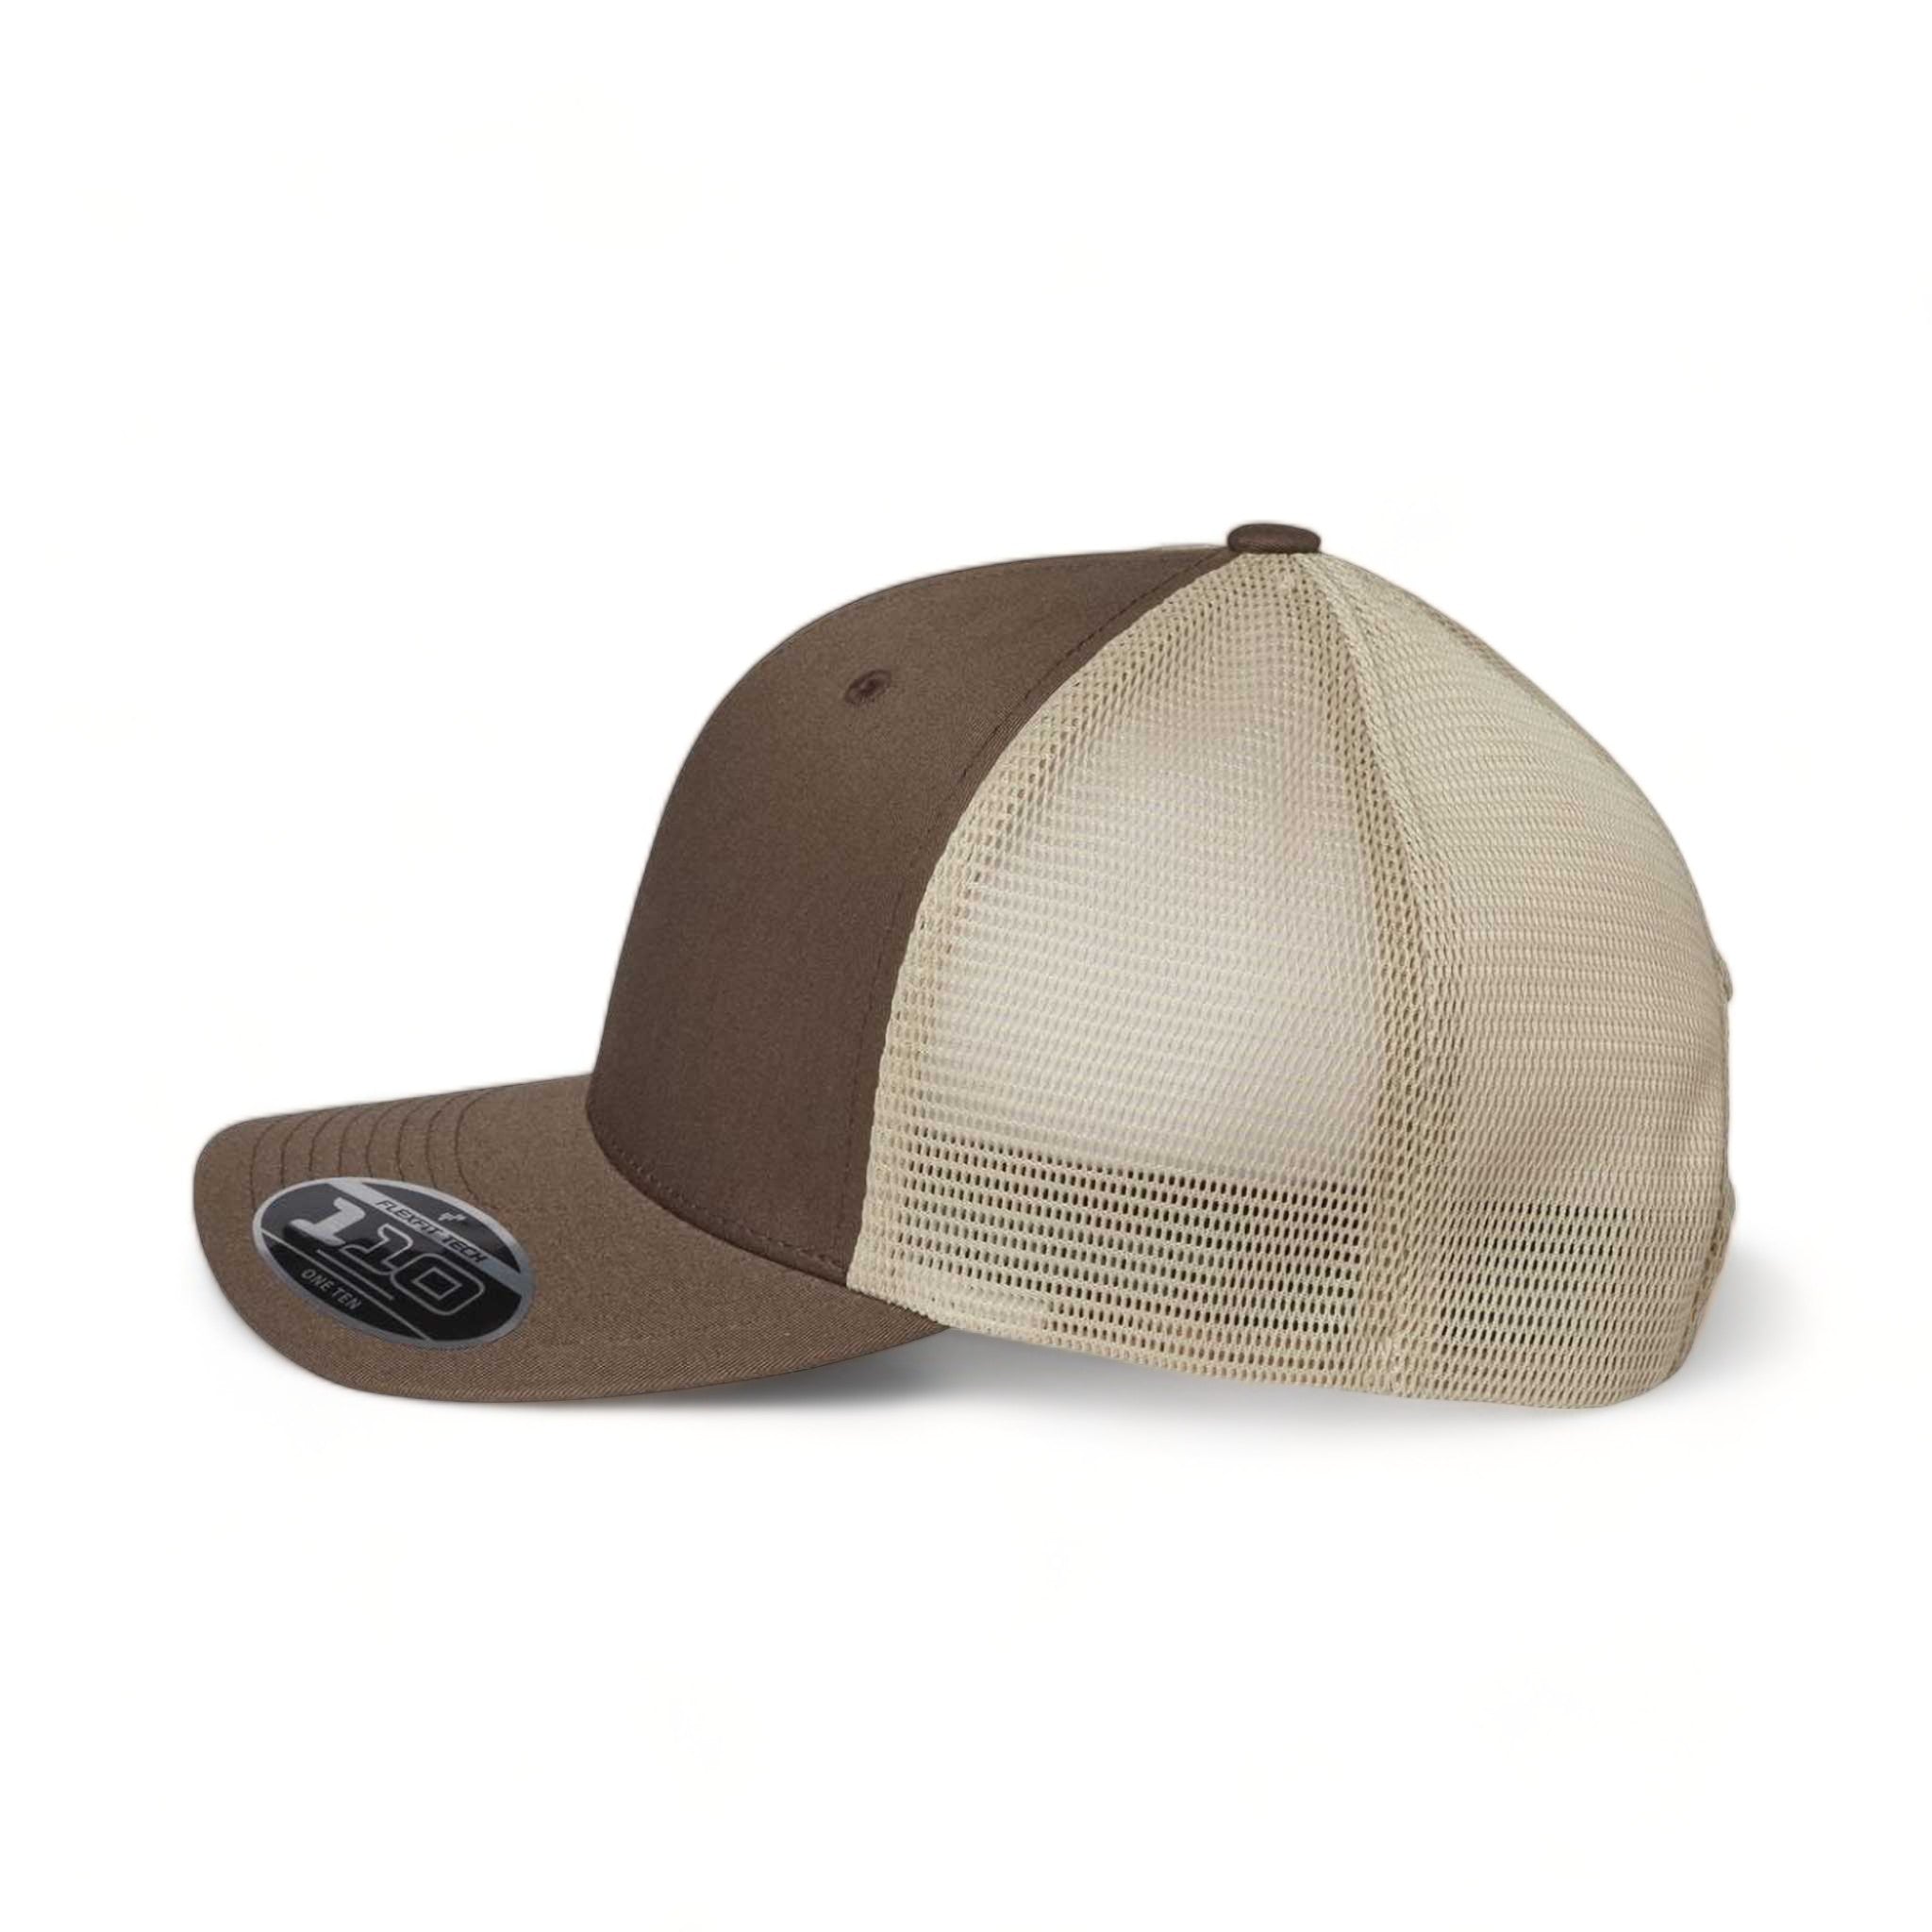 Side view of Flexfit 110M custom hat in brown and khaki